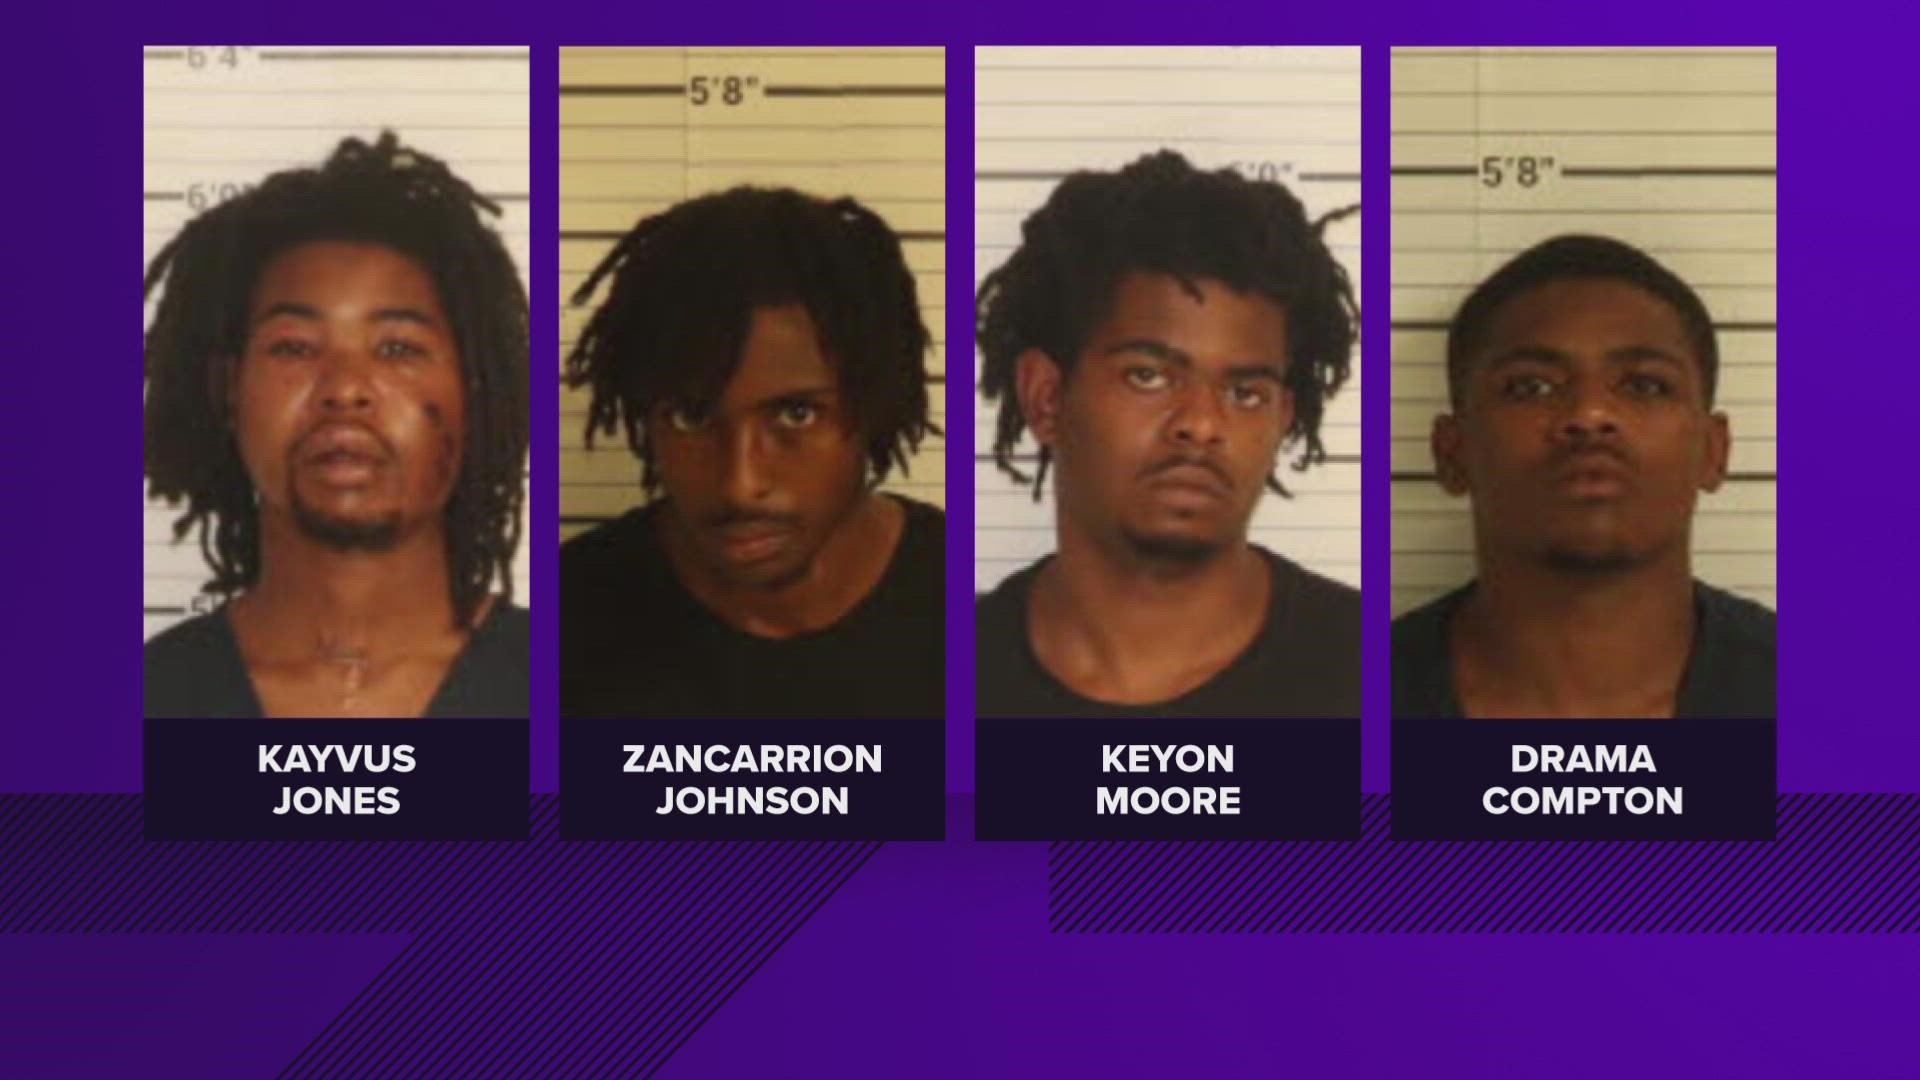 According to police, Kayvus Jones, Keyon Moore, Zancarrion Johnson, and Drama Compton were all arrested Thursday in connection to the shooting.